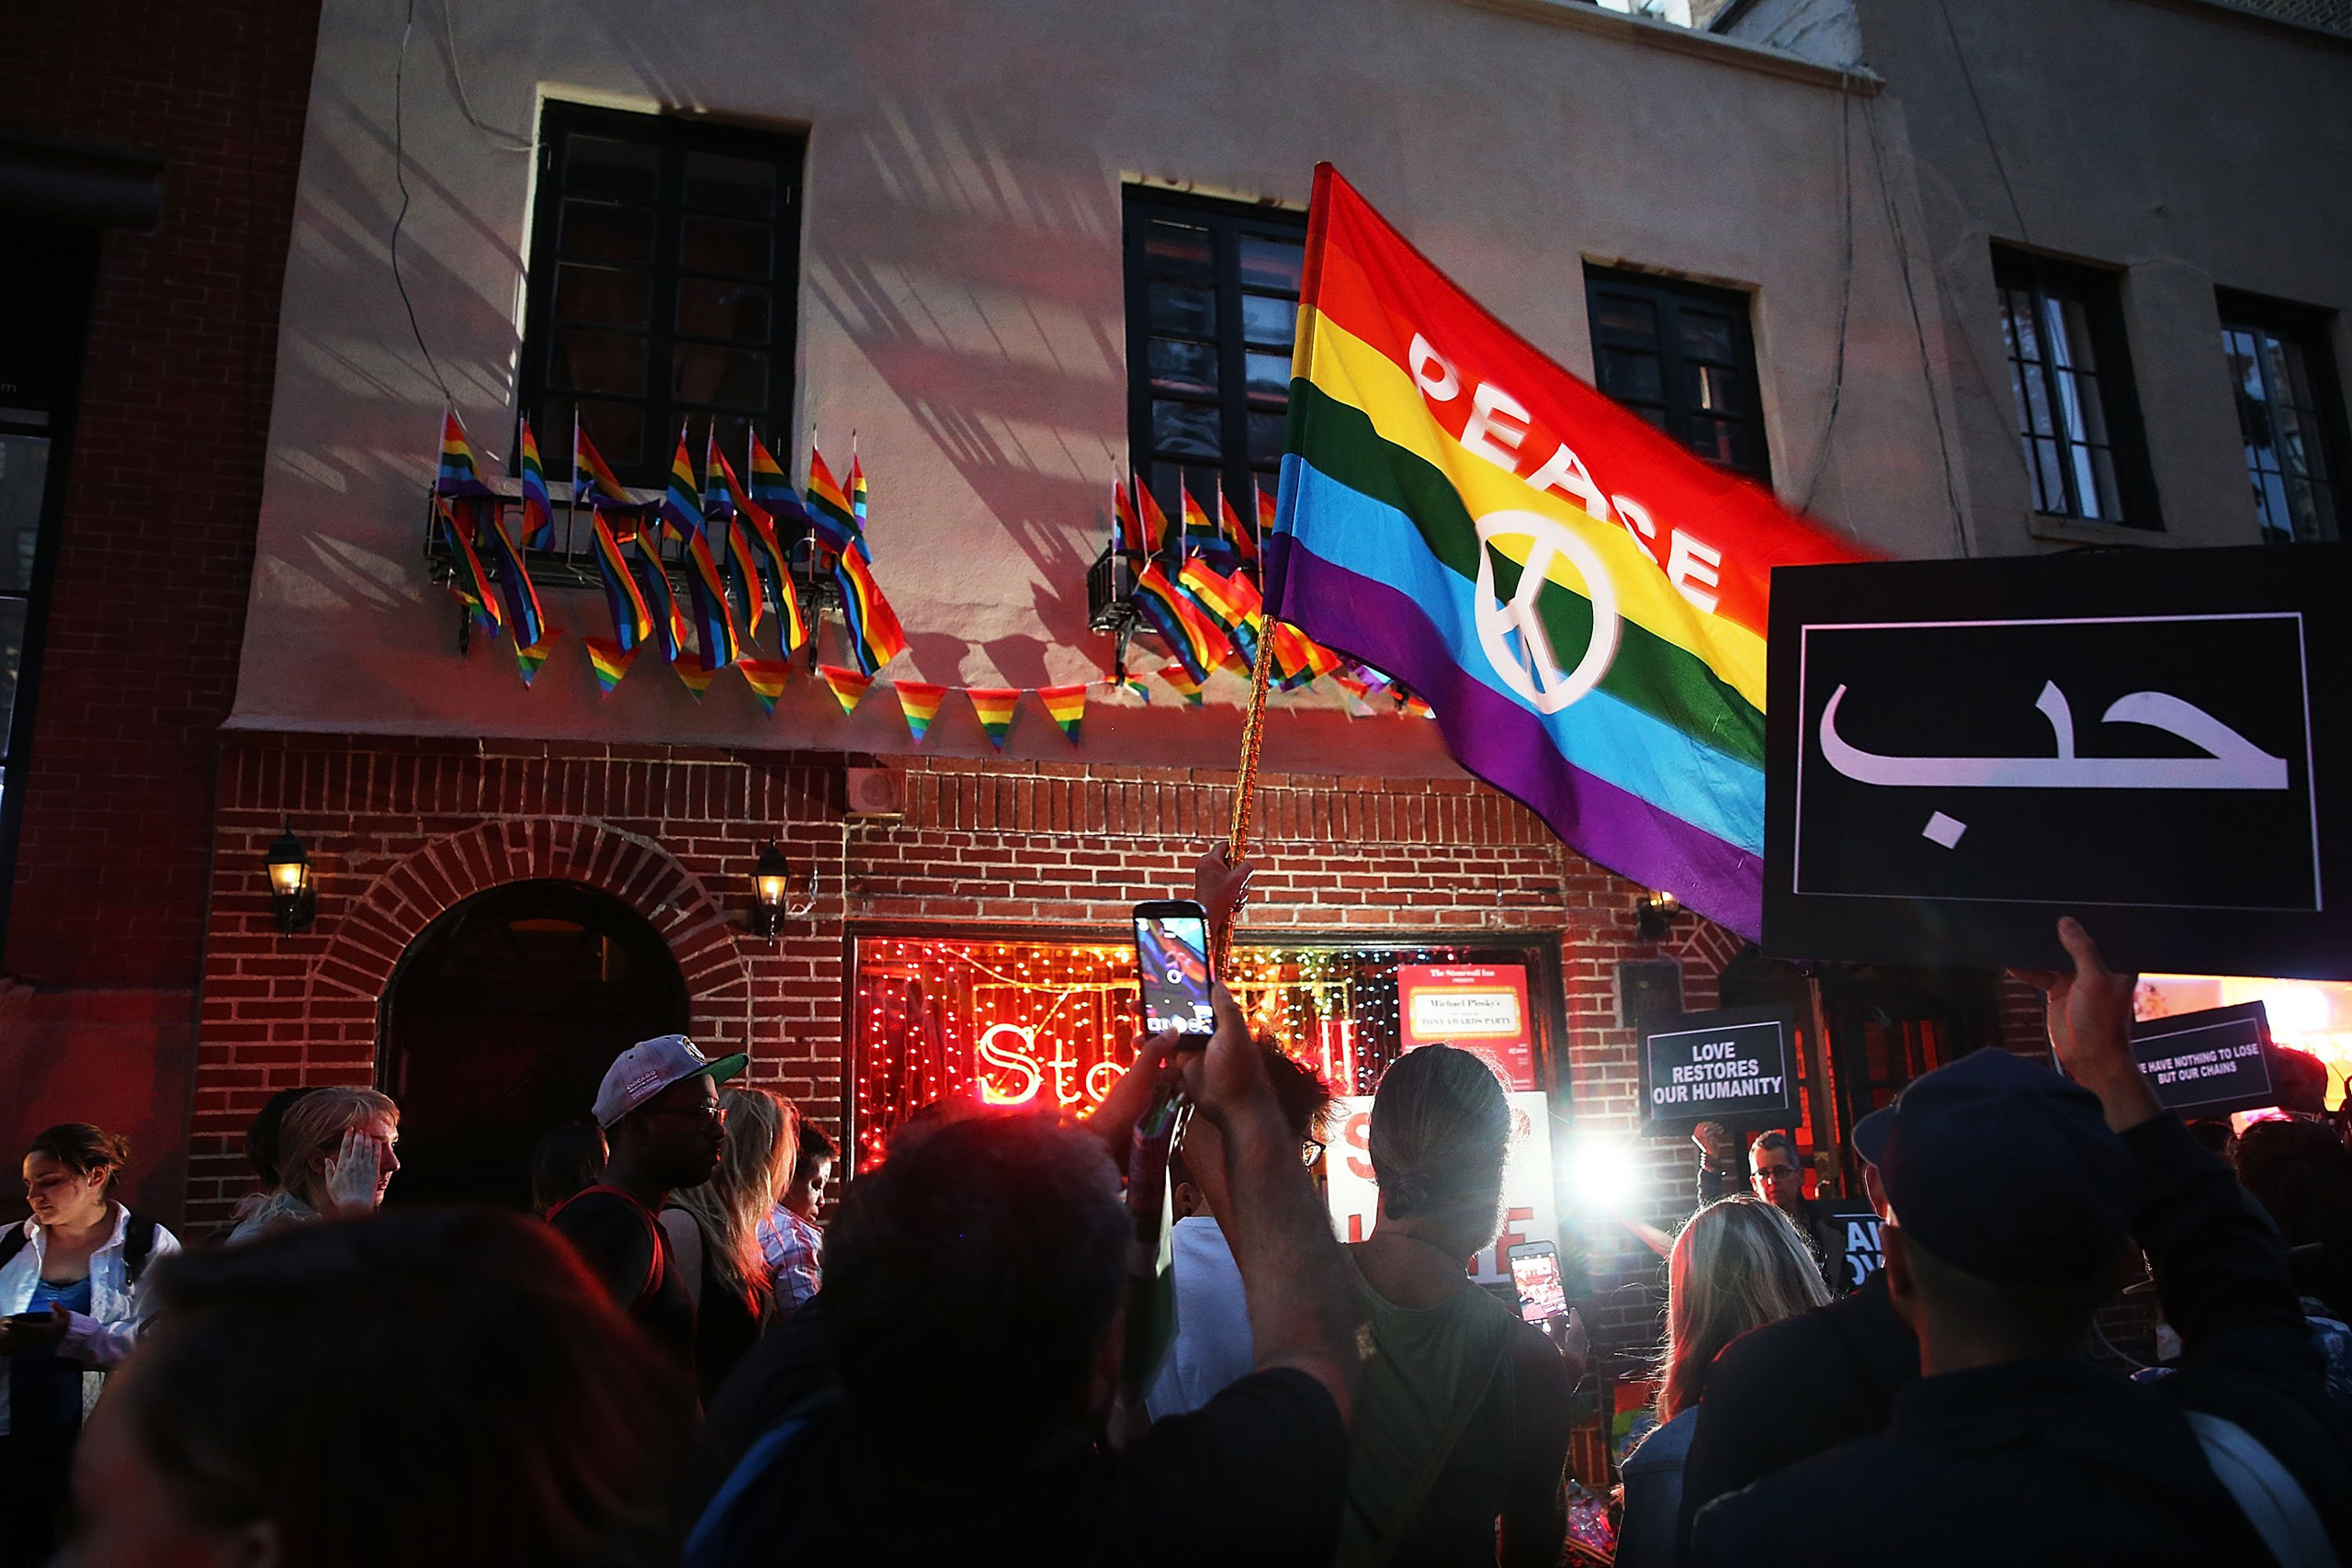 Mourners gather outside of the iconic New York City gay and lesbian bar the Stonewall Inn to light candles, lay flowers and grieve for those killed in Orlando on June 12, 2016. (Spencer Platt—Getty Images)